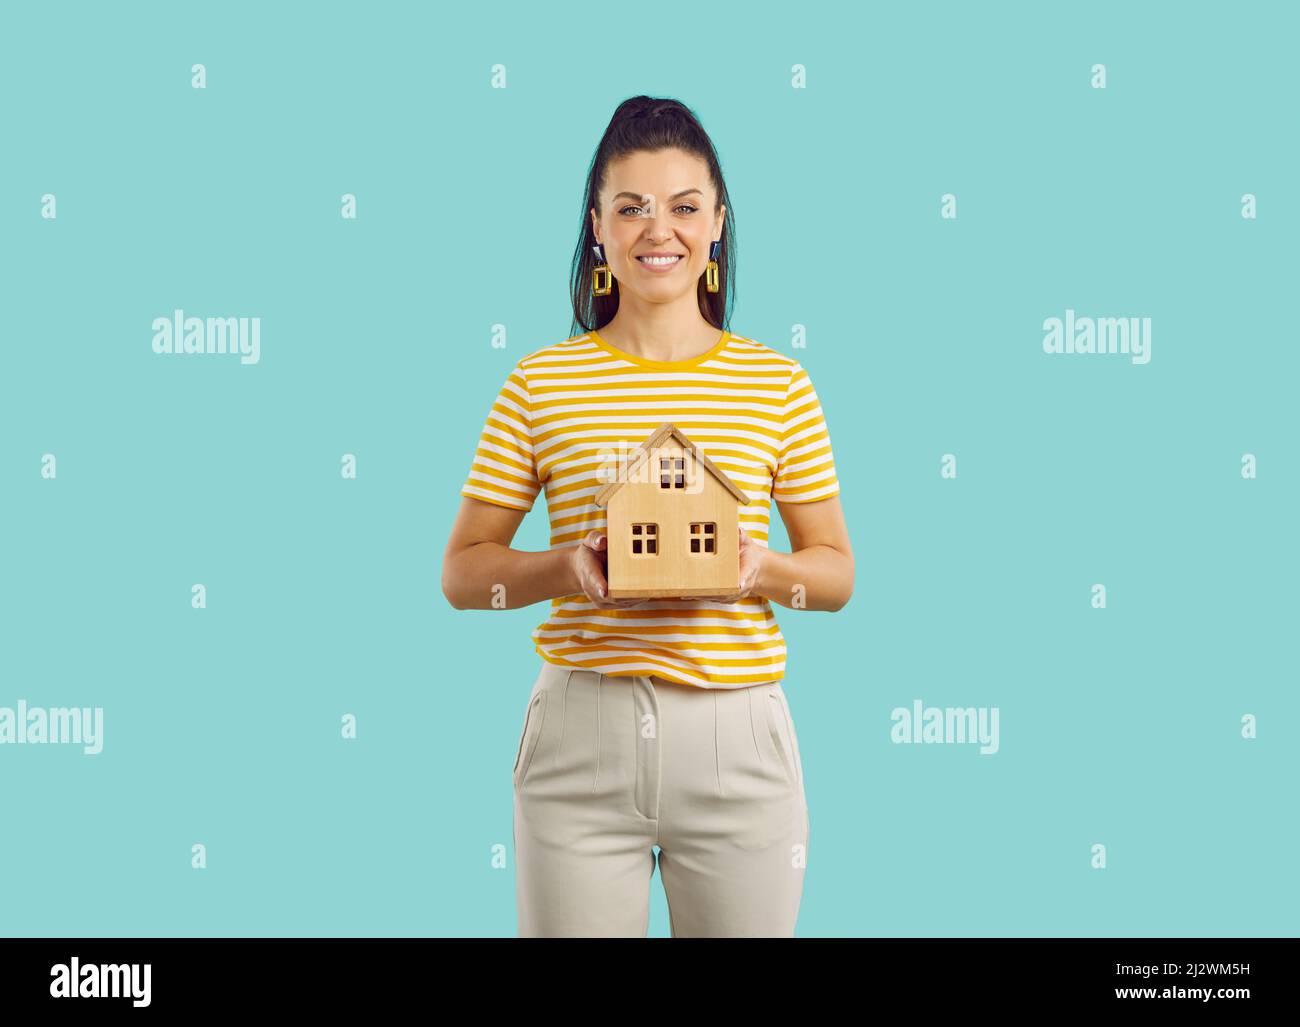 Portrait of pretty smiling woman holding wooden model house standing on blue background. Property investment and house mortgage financial concept. Stock Photo